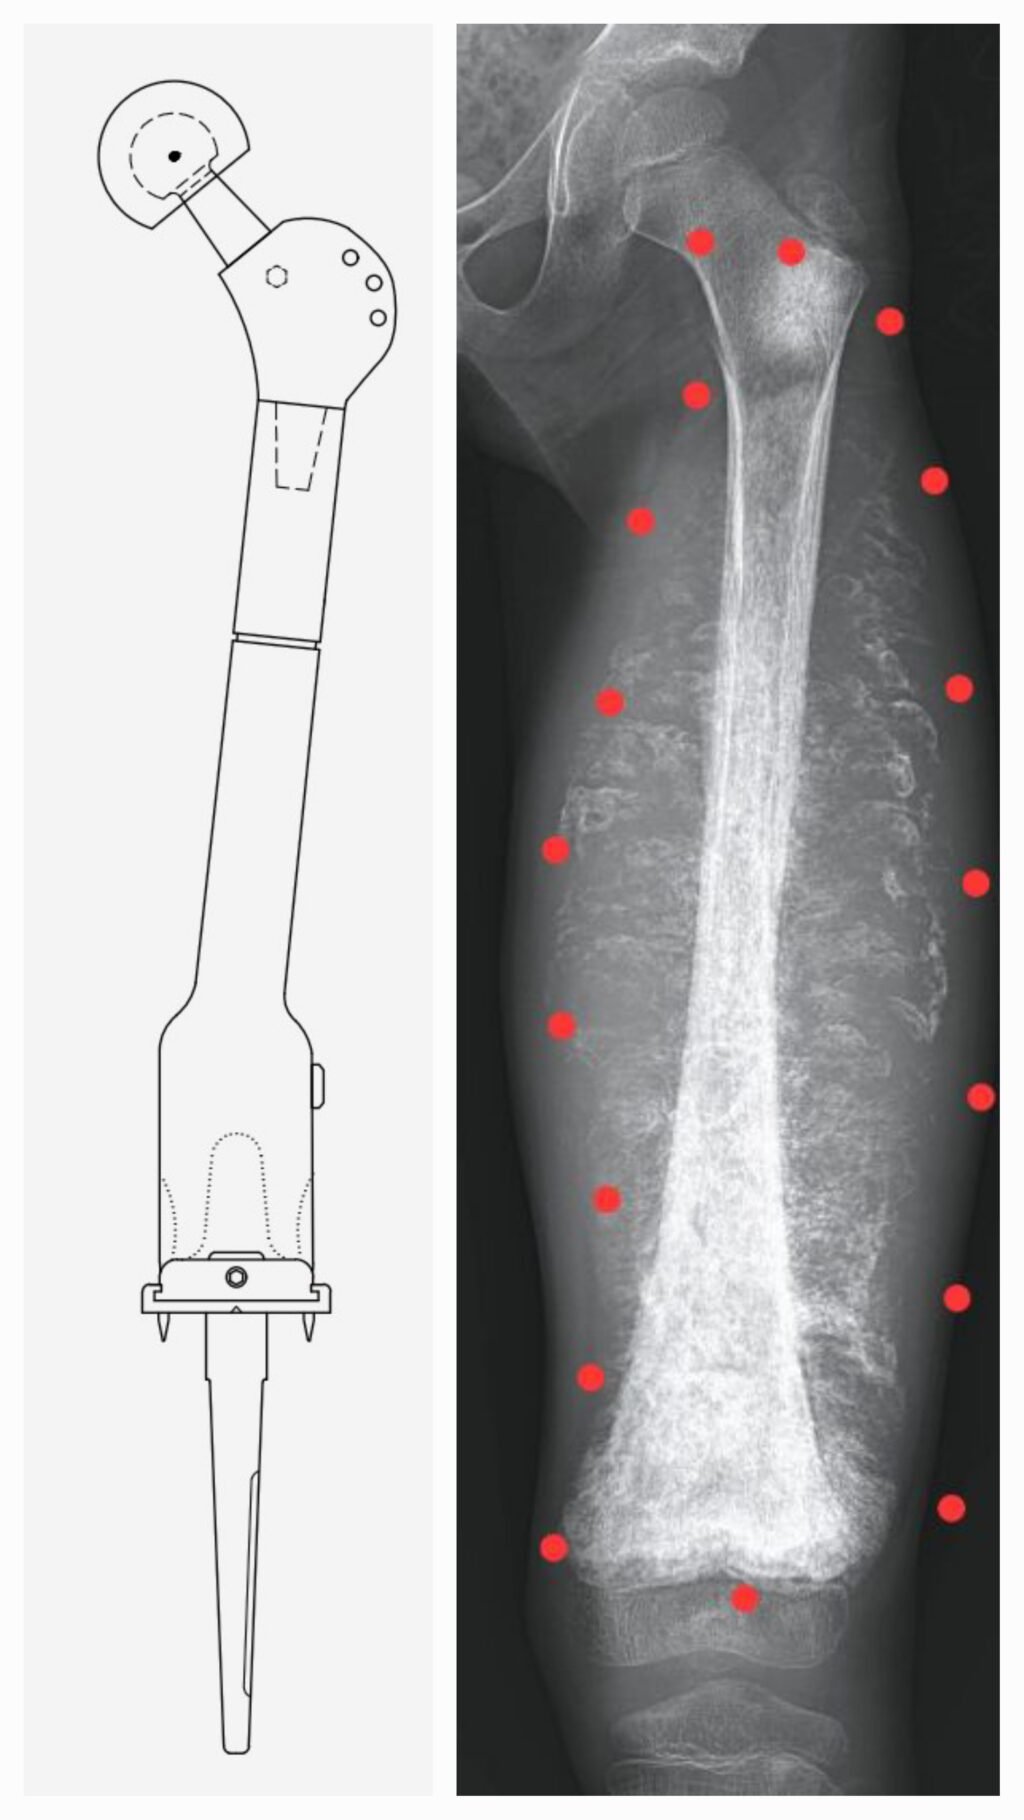 Apollo Cancer Centres, performed a unique and complex limb salvage surgery to treat a case of Osteosarcoma to remove cancer and reconstruct with custom growing prosthesis in the left thigh